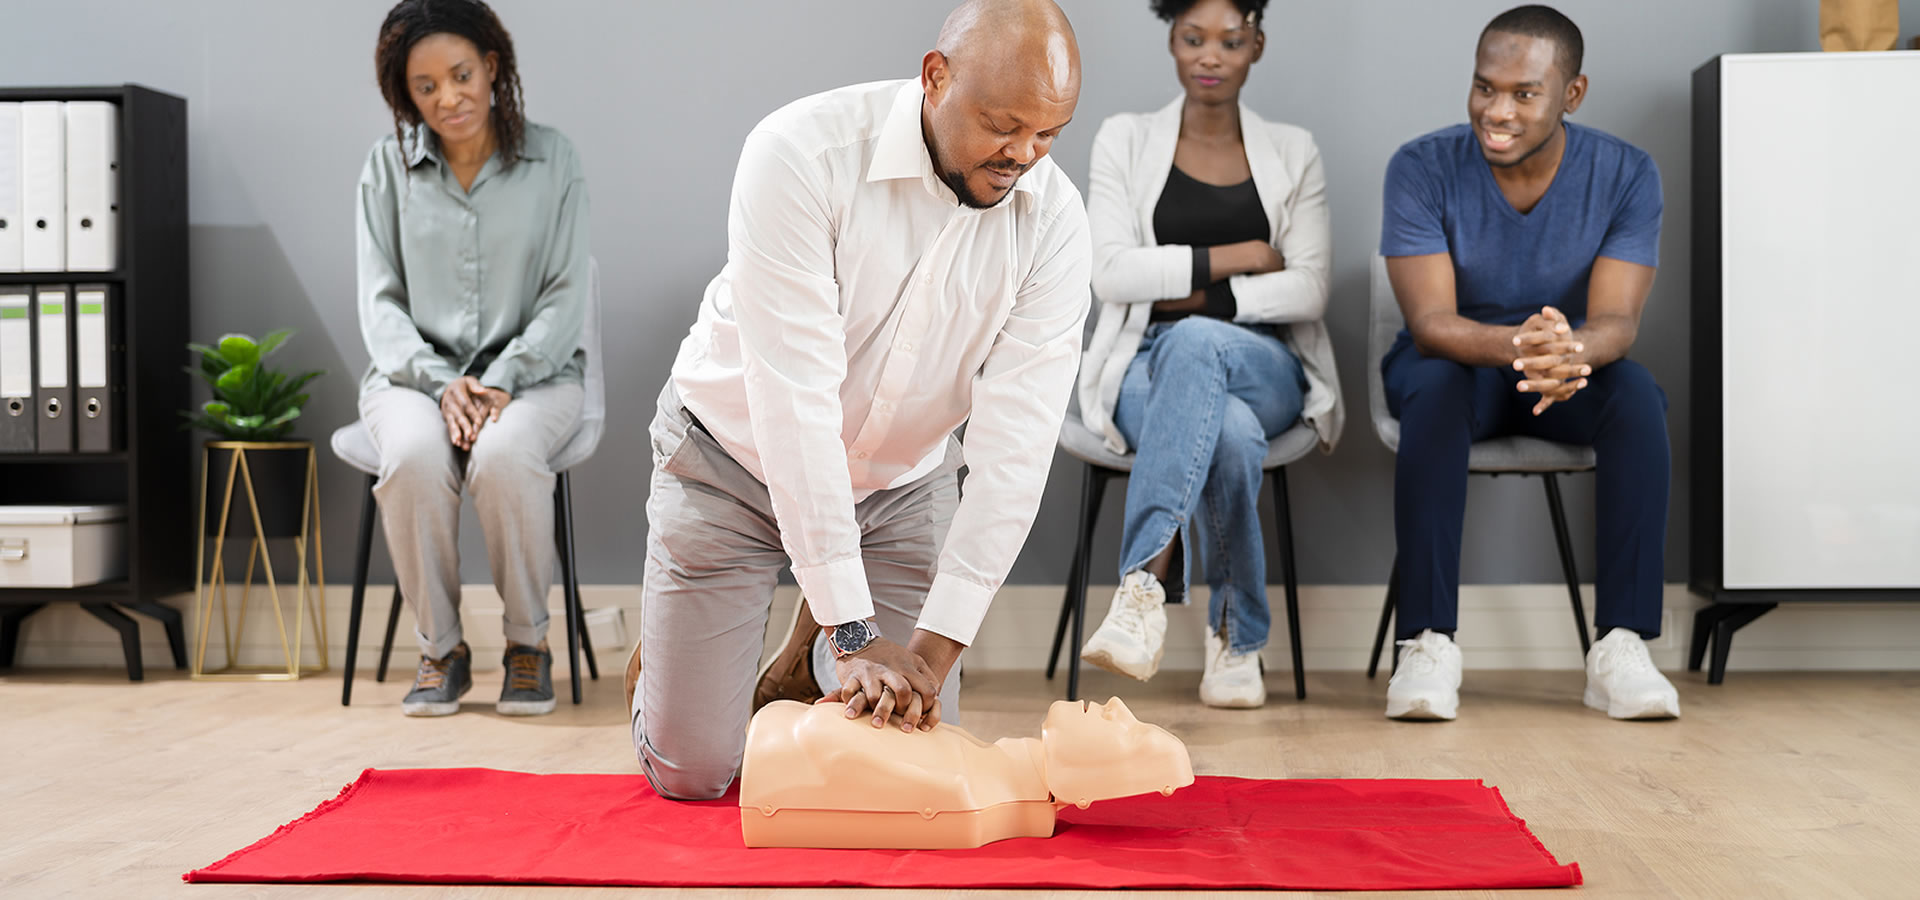 Difference Between CPR Training for Children and Infants